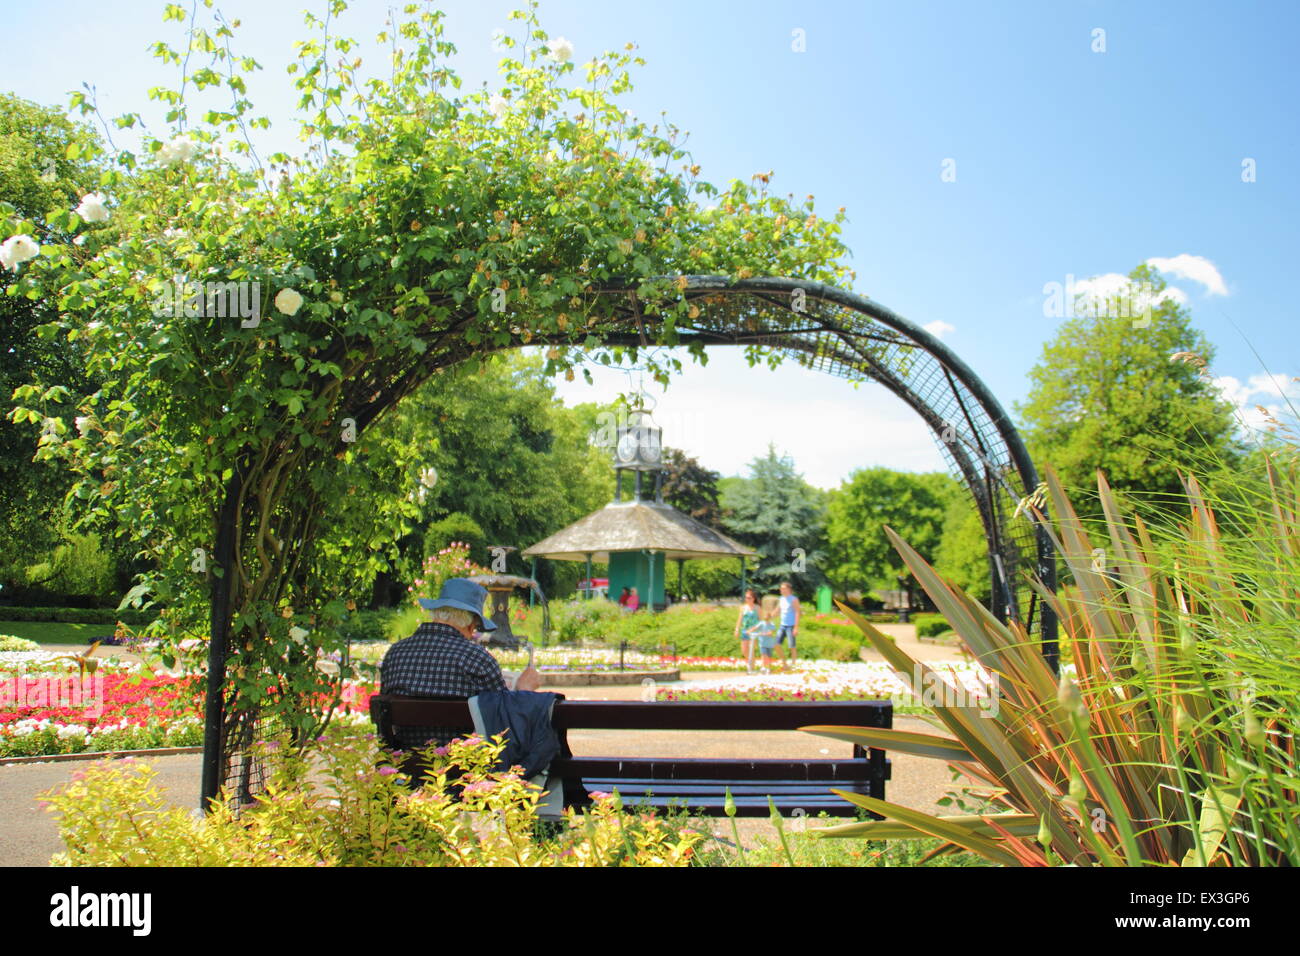 A man sits on a bench beneath a rose arch on a hot summer's day in Hall Leys Park, Matlock, Derbyshire Dales, England UK Stock Photo